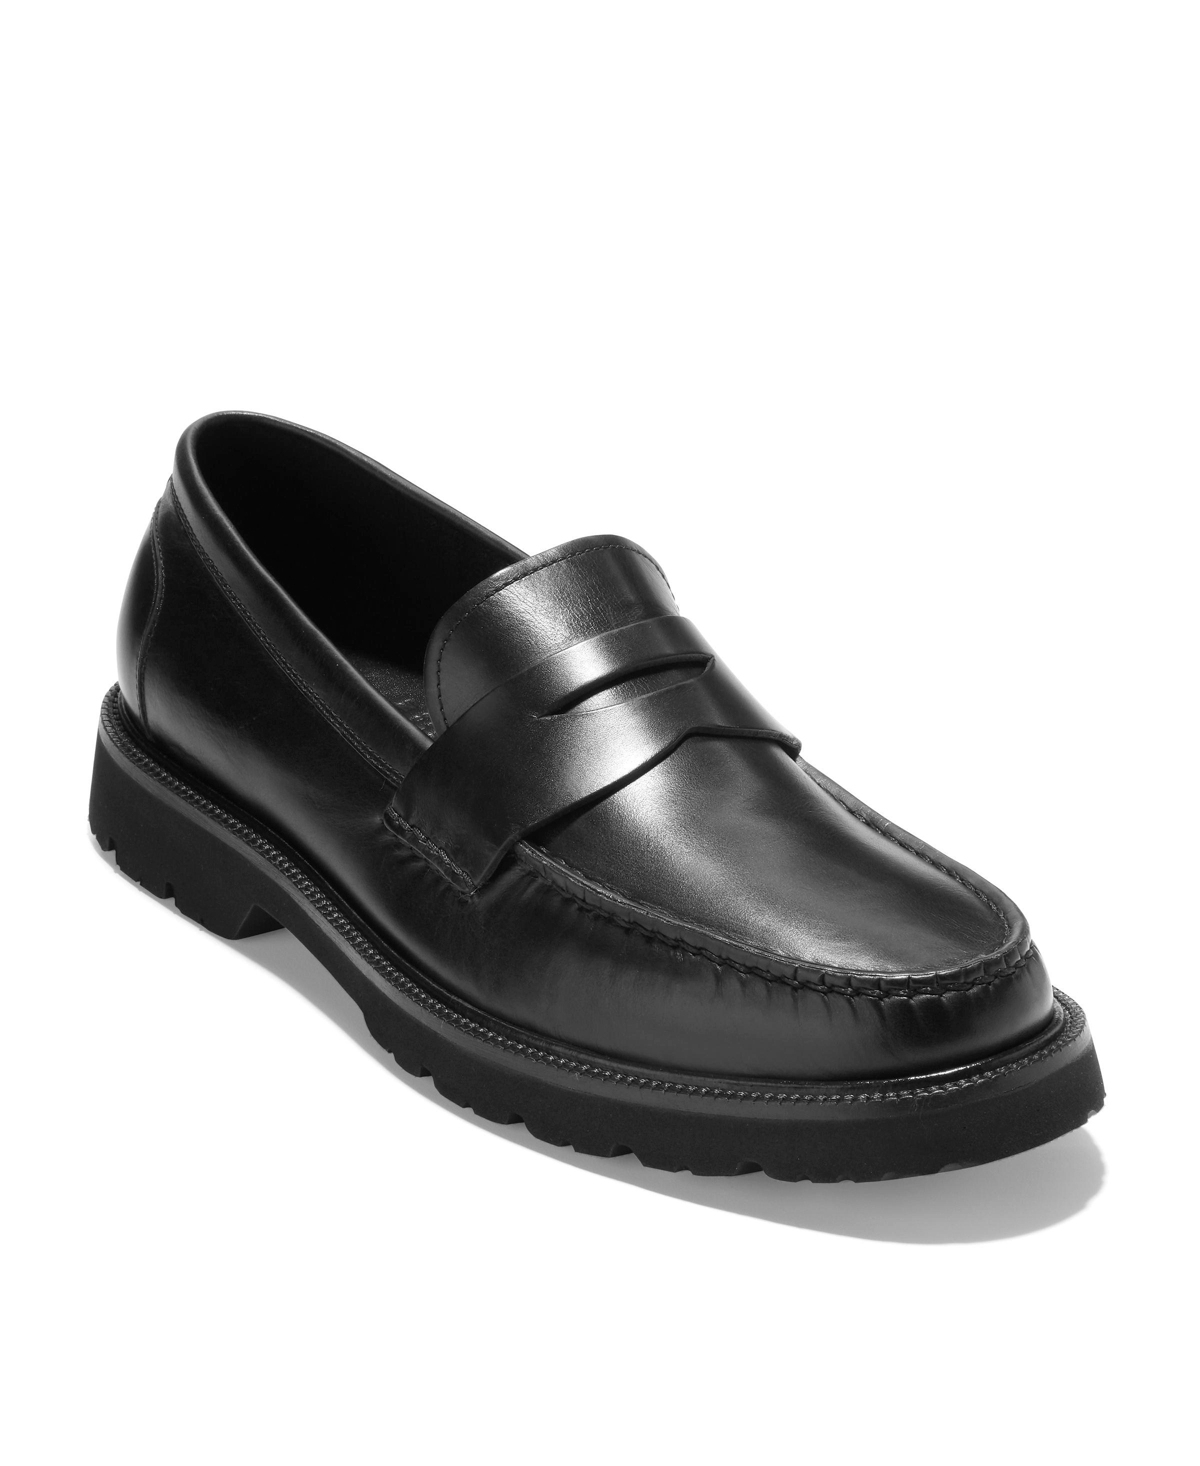 COLE HAAN MEN'S AMERICAN CLASSICS PENNY LOAFER